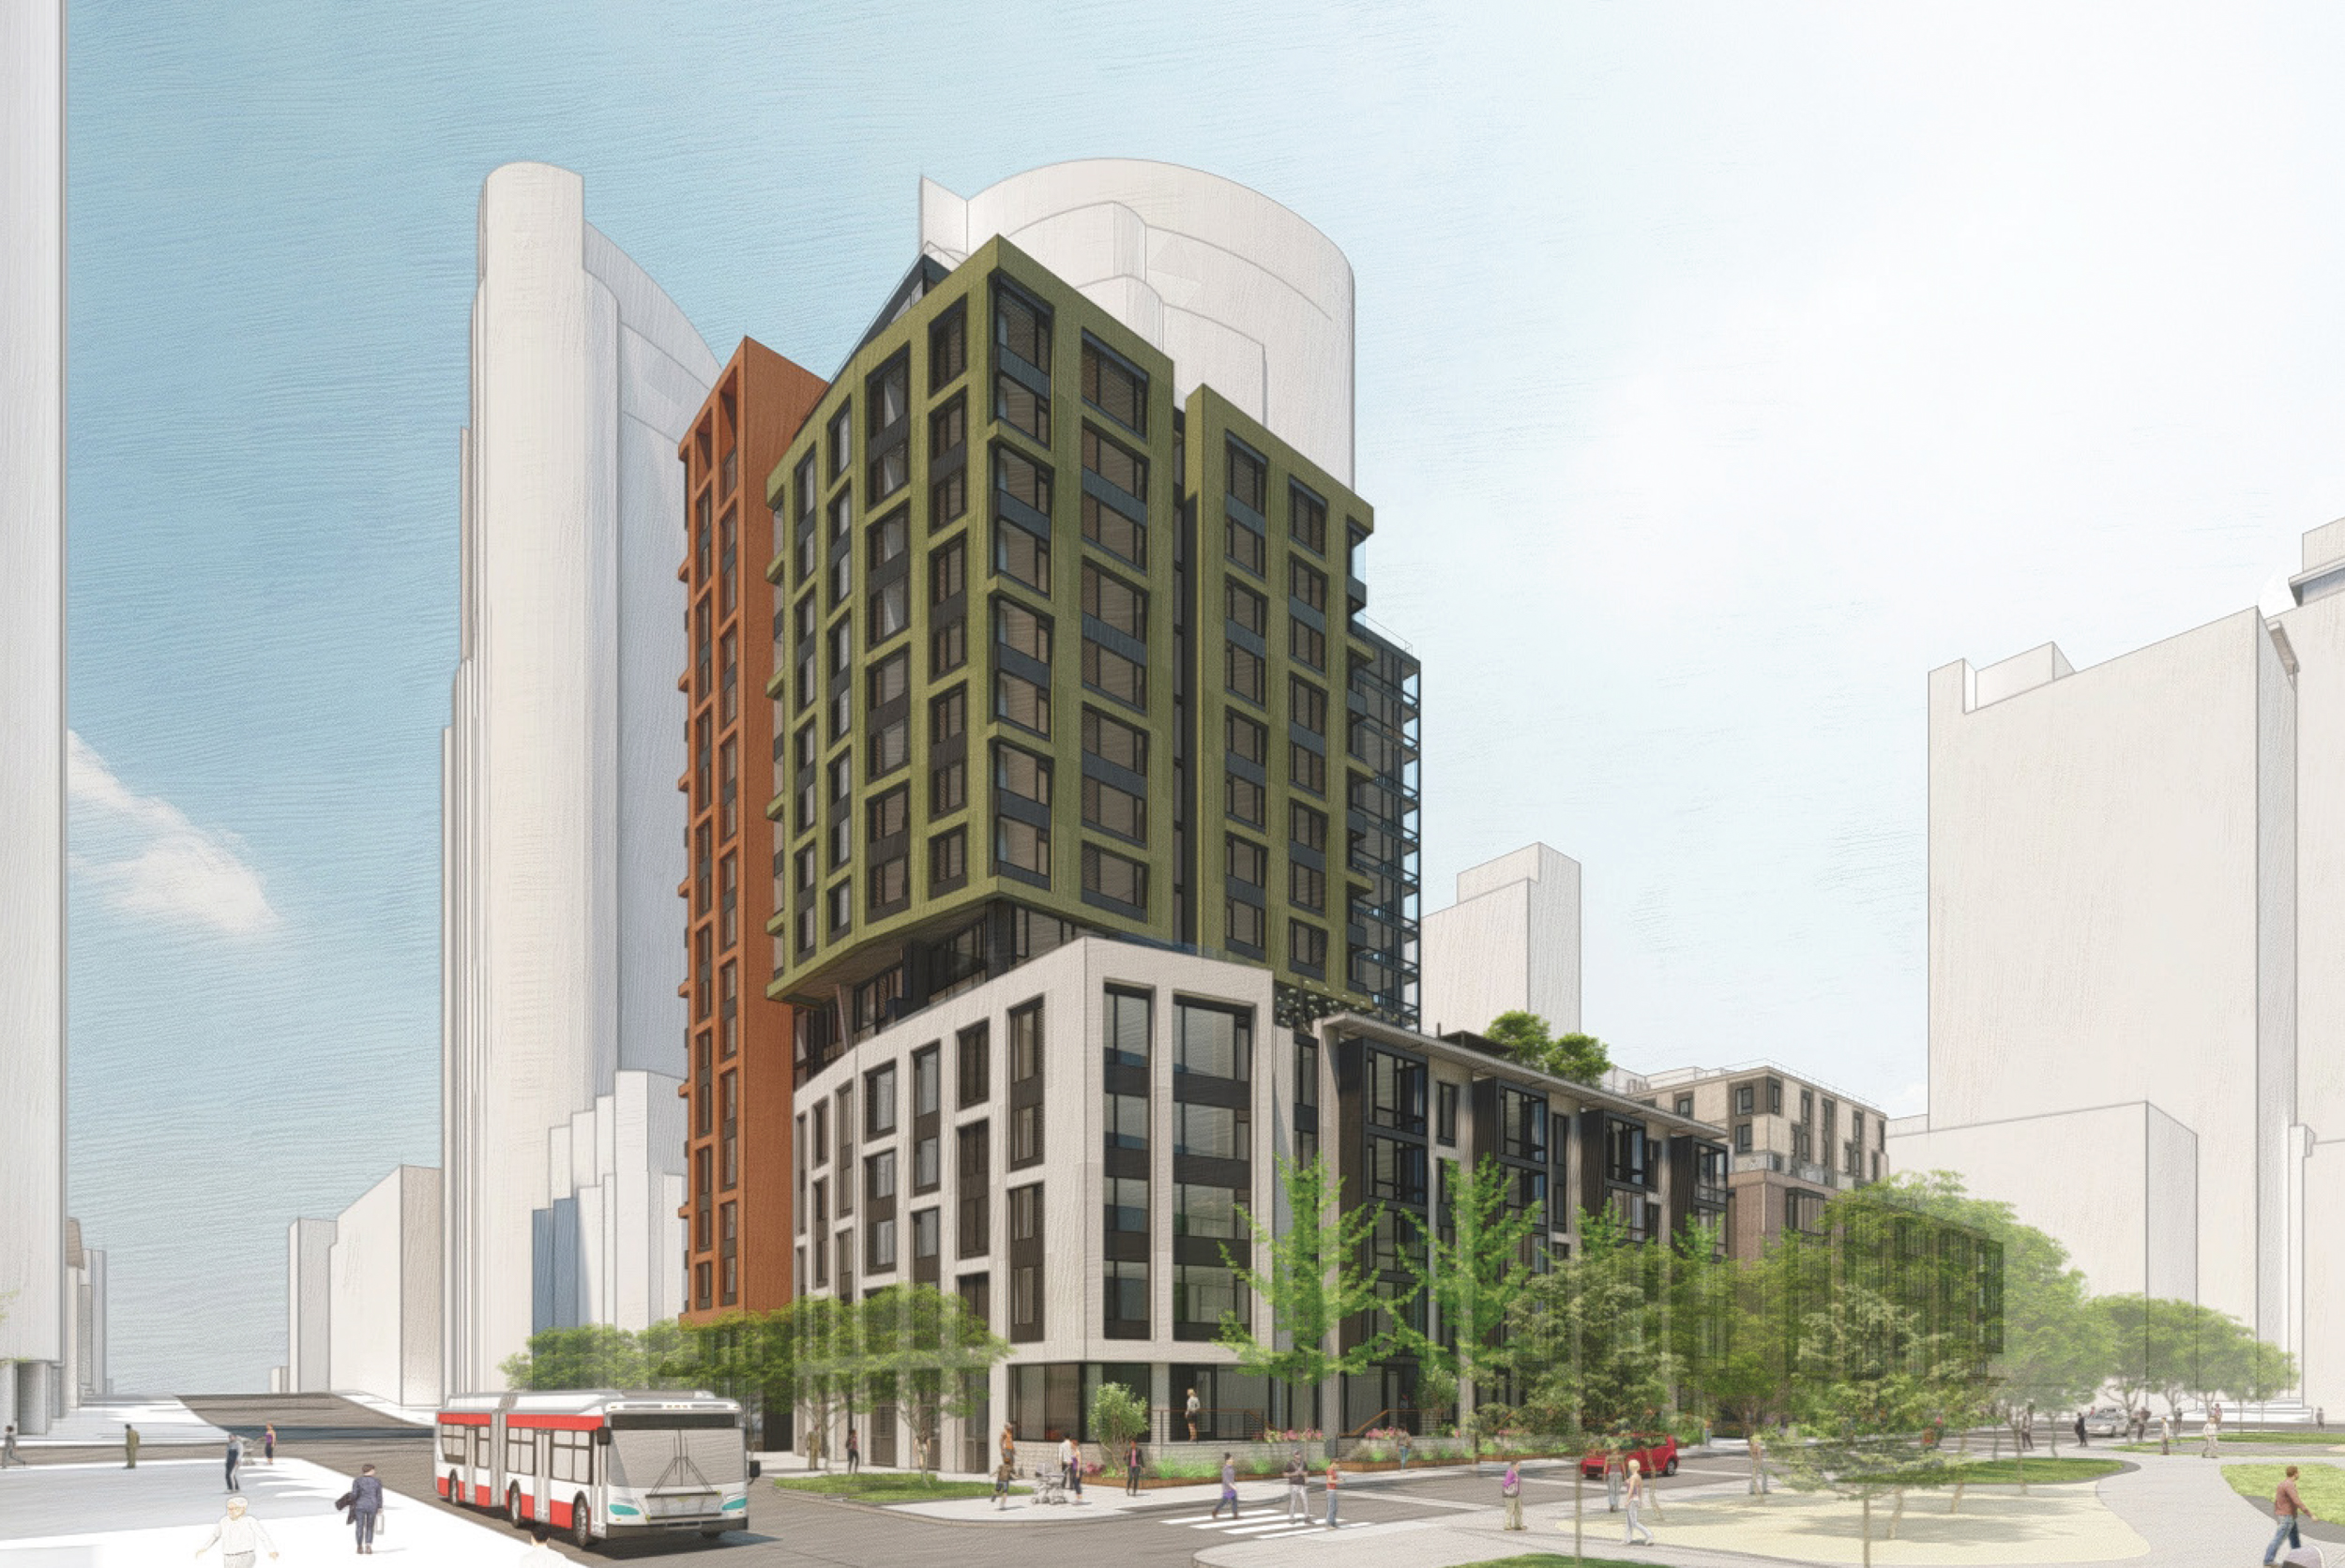 Transbay Block 2 East seen from Main Street and Clementina Street, rendering by Kennerly Architecture & Planning